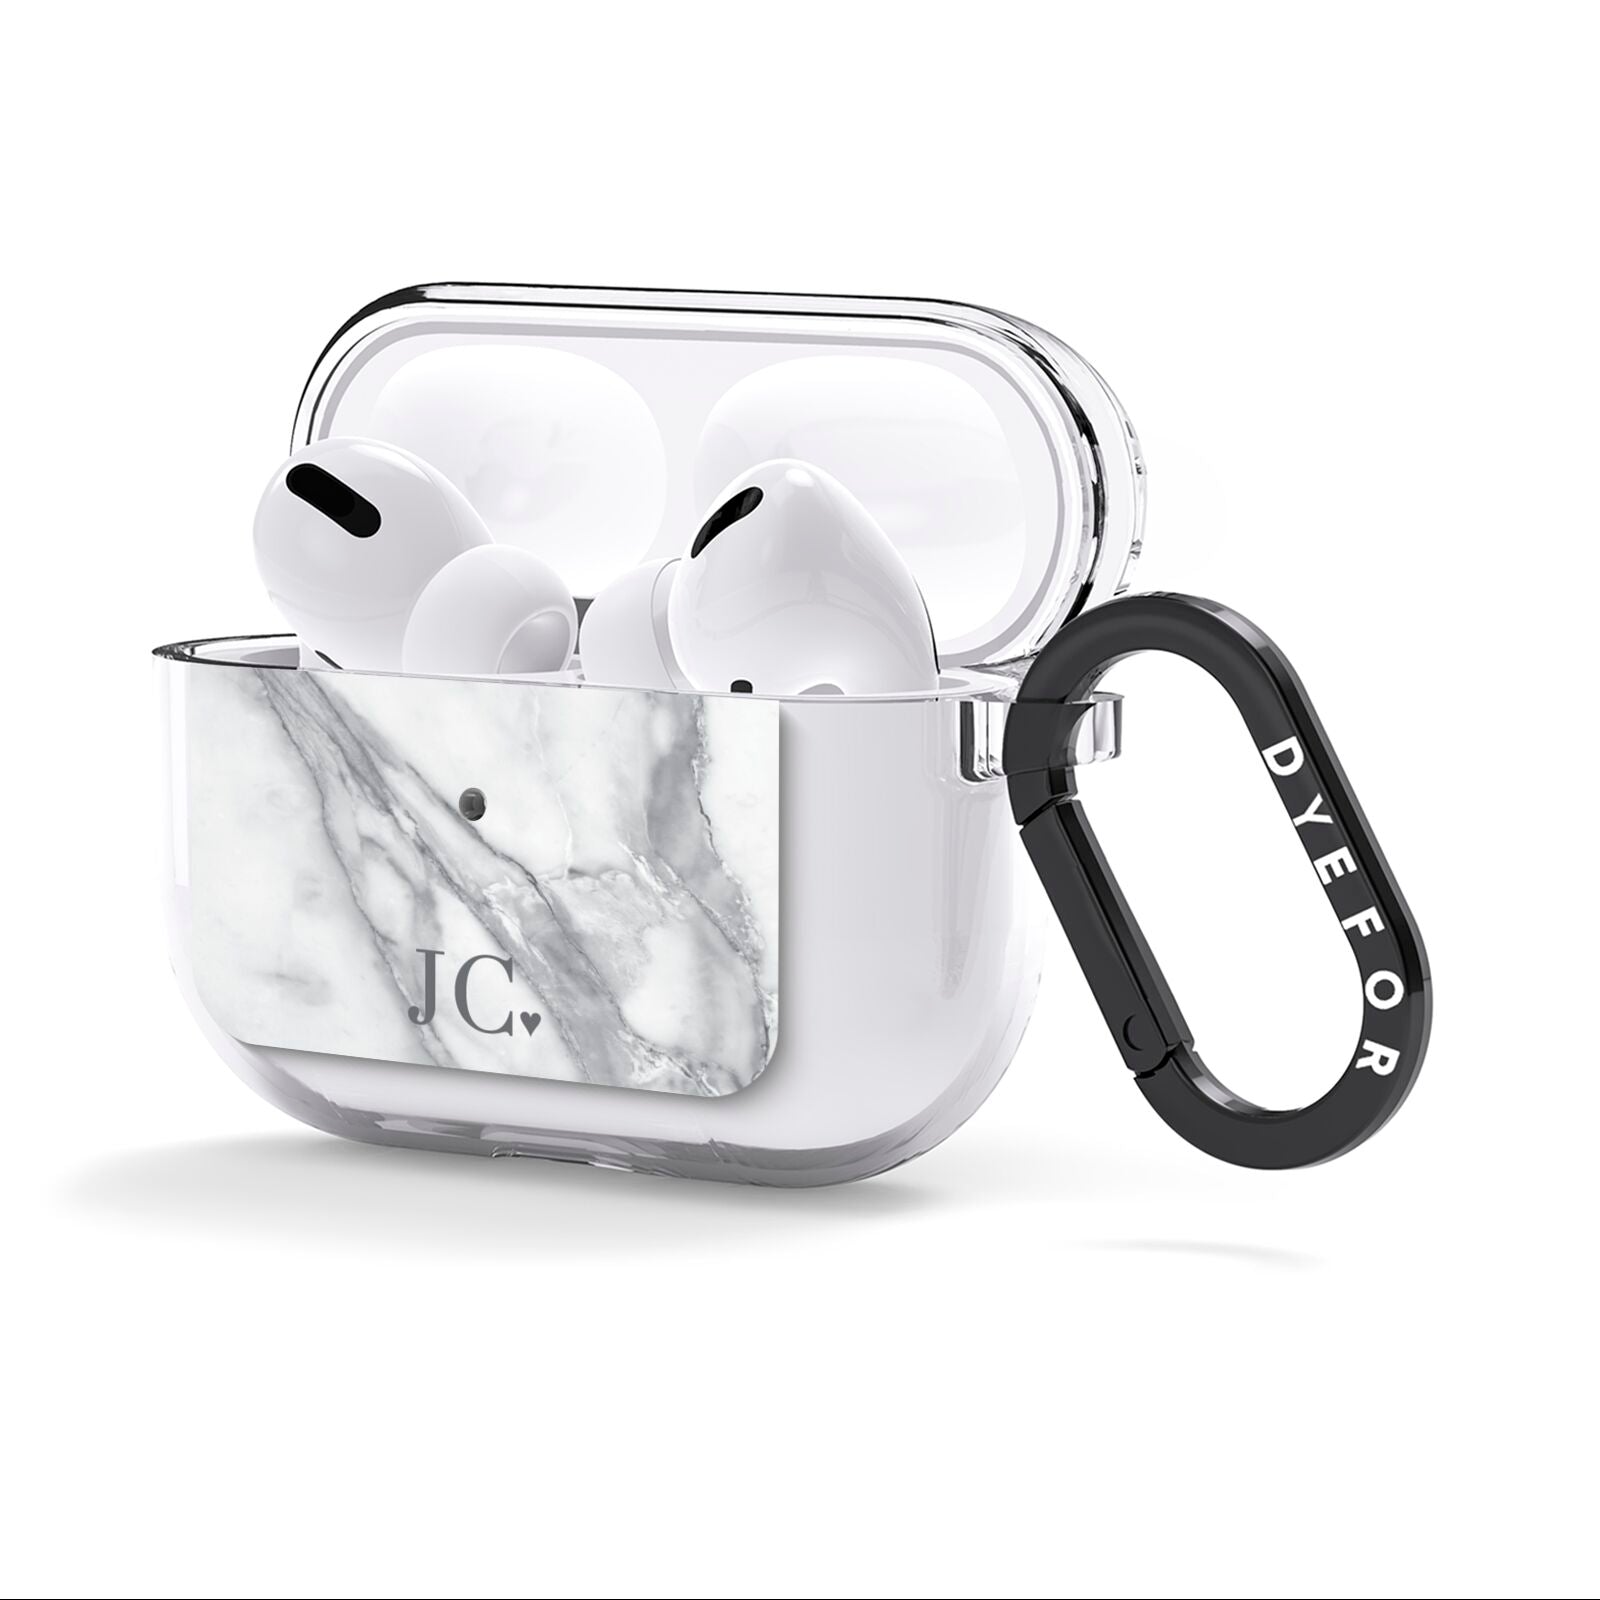 Initials Love Heart AirPods Clear Case 3rd Gen Side Image